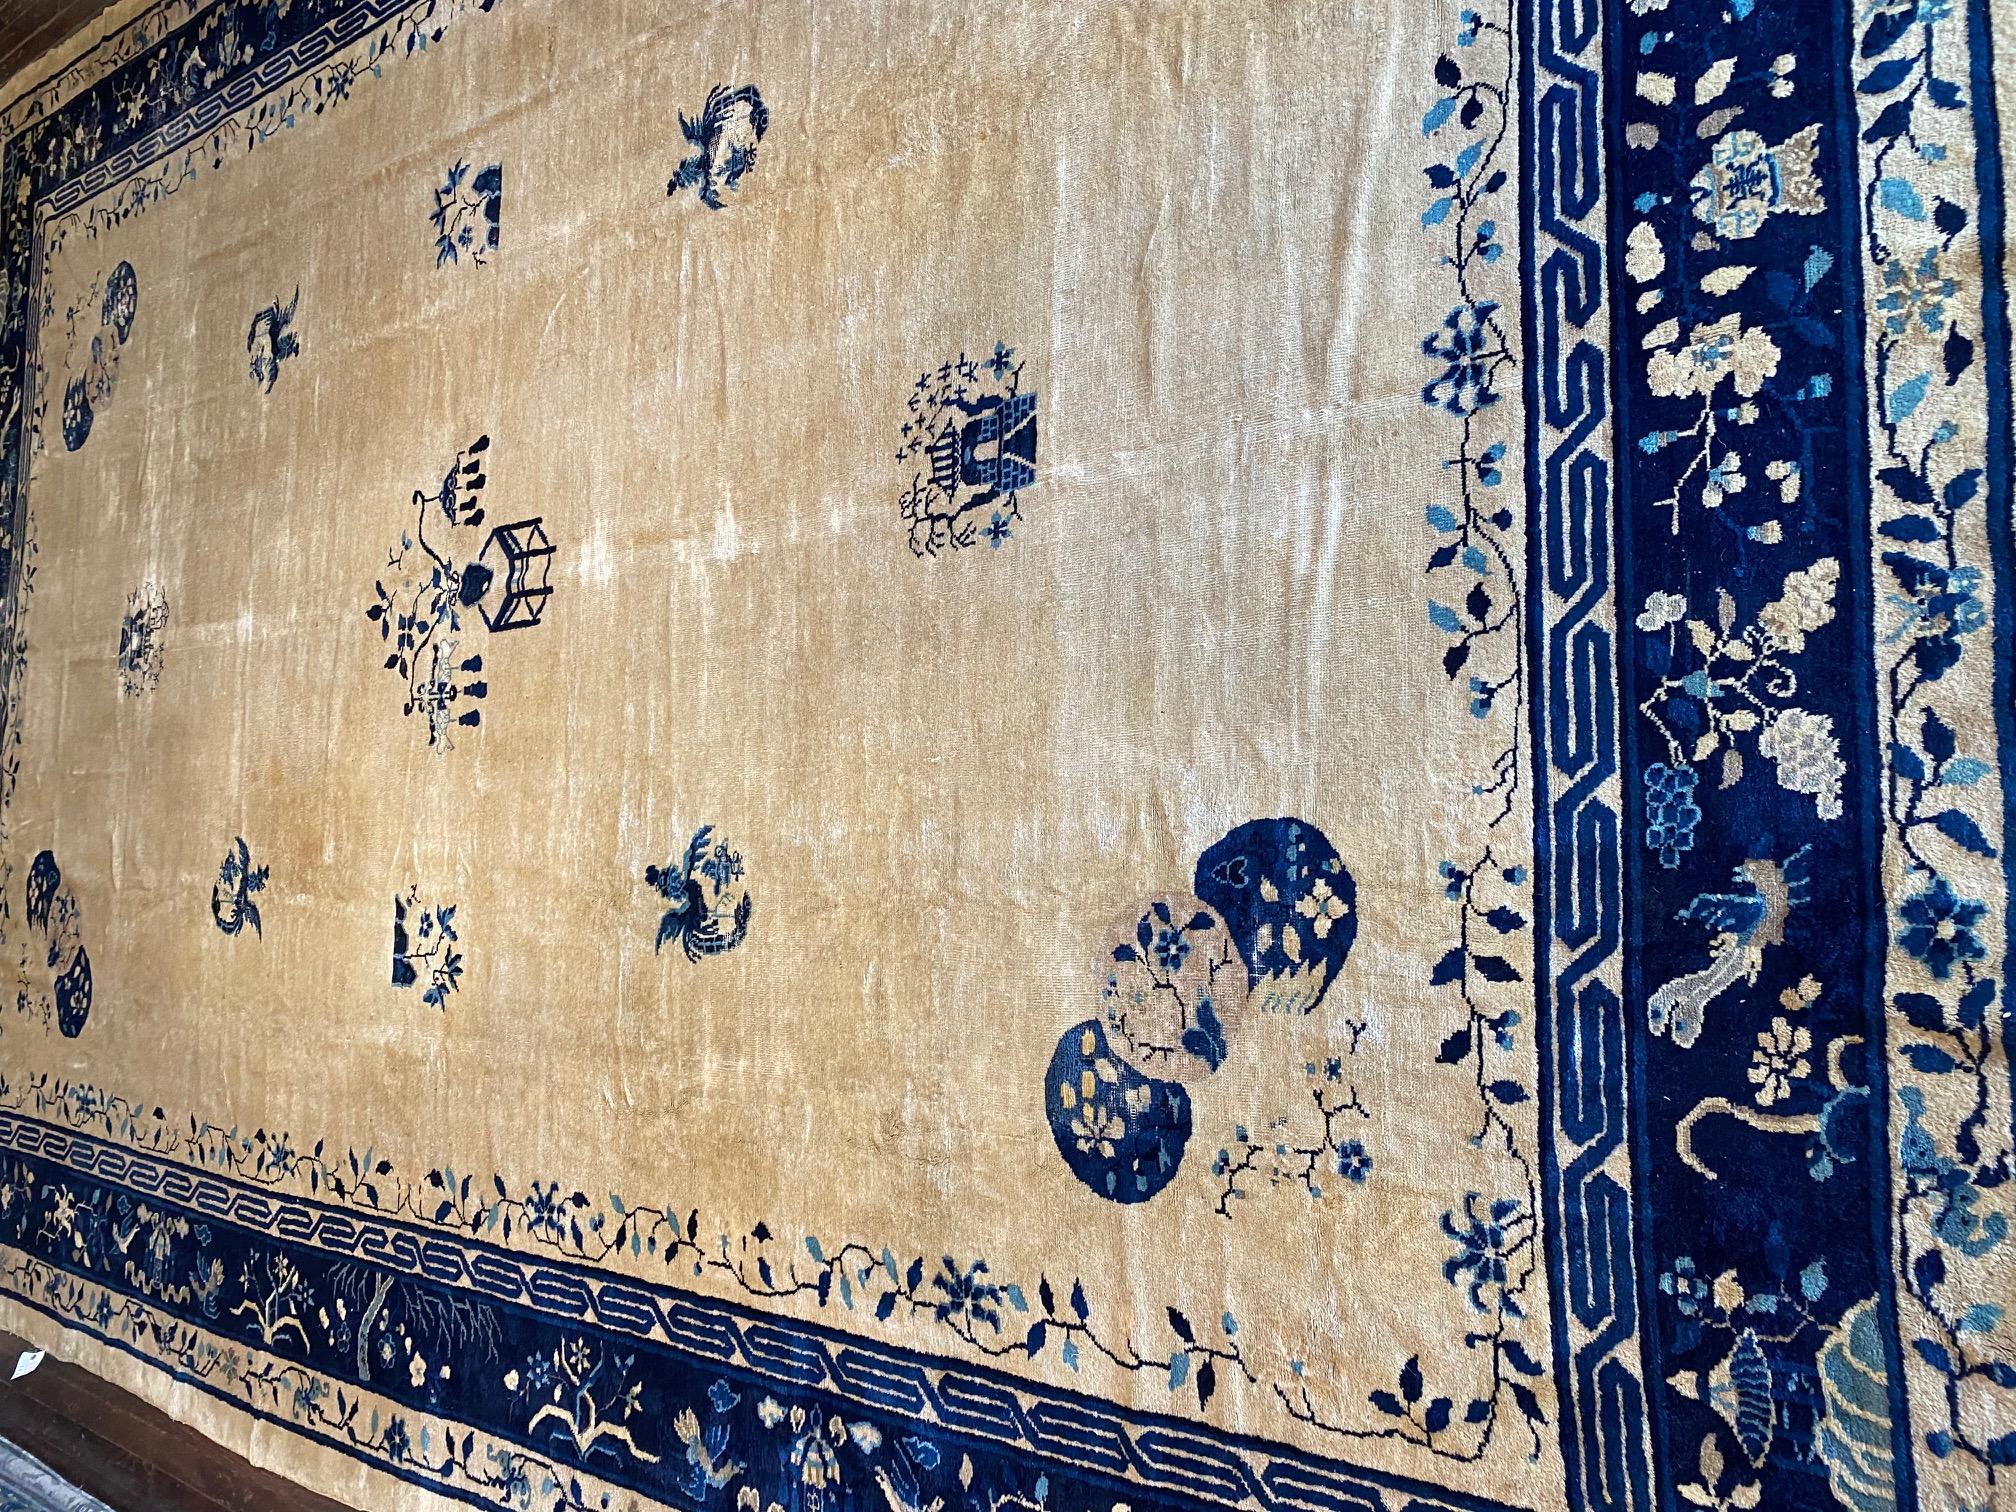 Immerse yourself in the timeless elegance of a Classic Early Twentieth Century Chinese Rug. This exquisite masterpiece is crafted with utmost precision, showcasing a masterful combination of shades of blue and cream. The subtle variations and